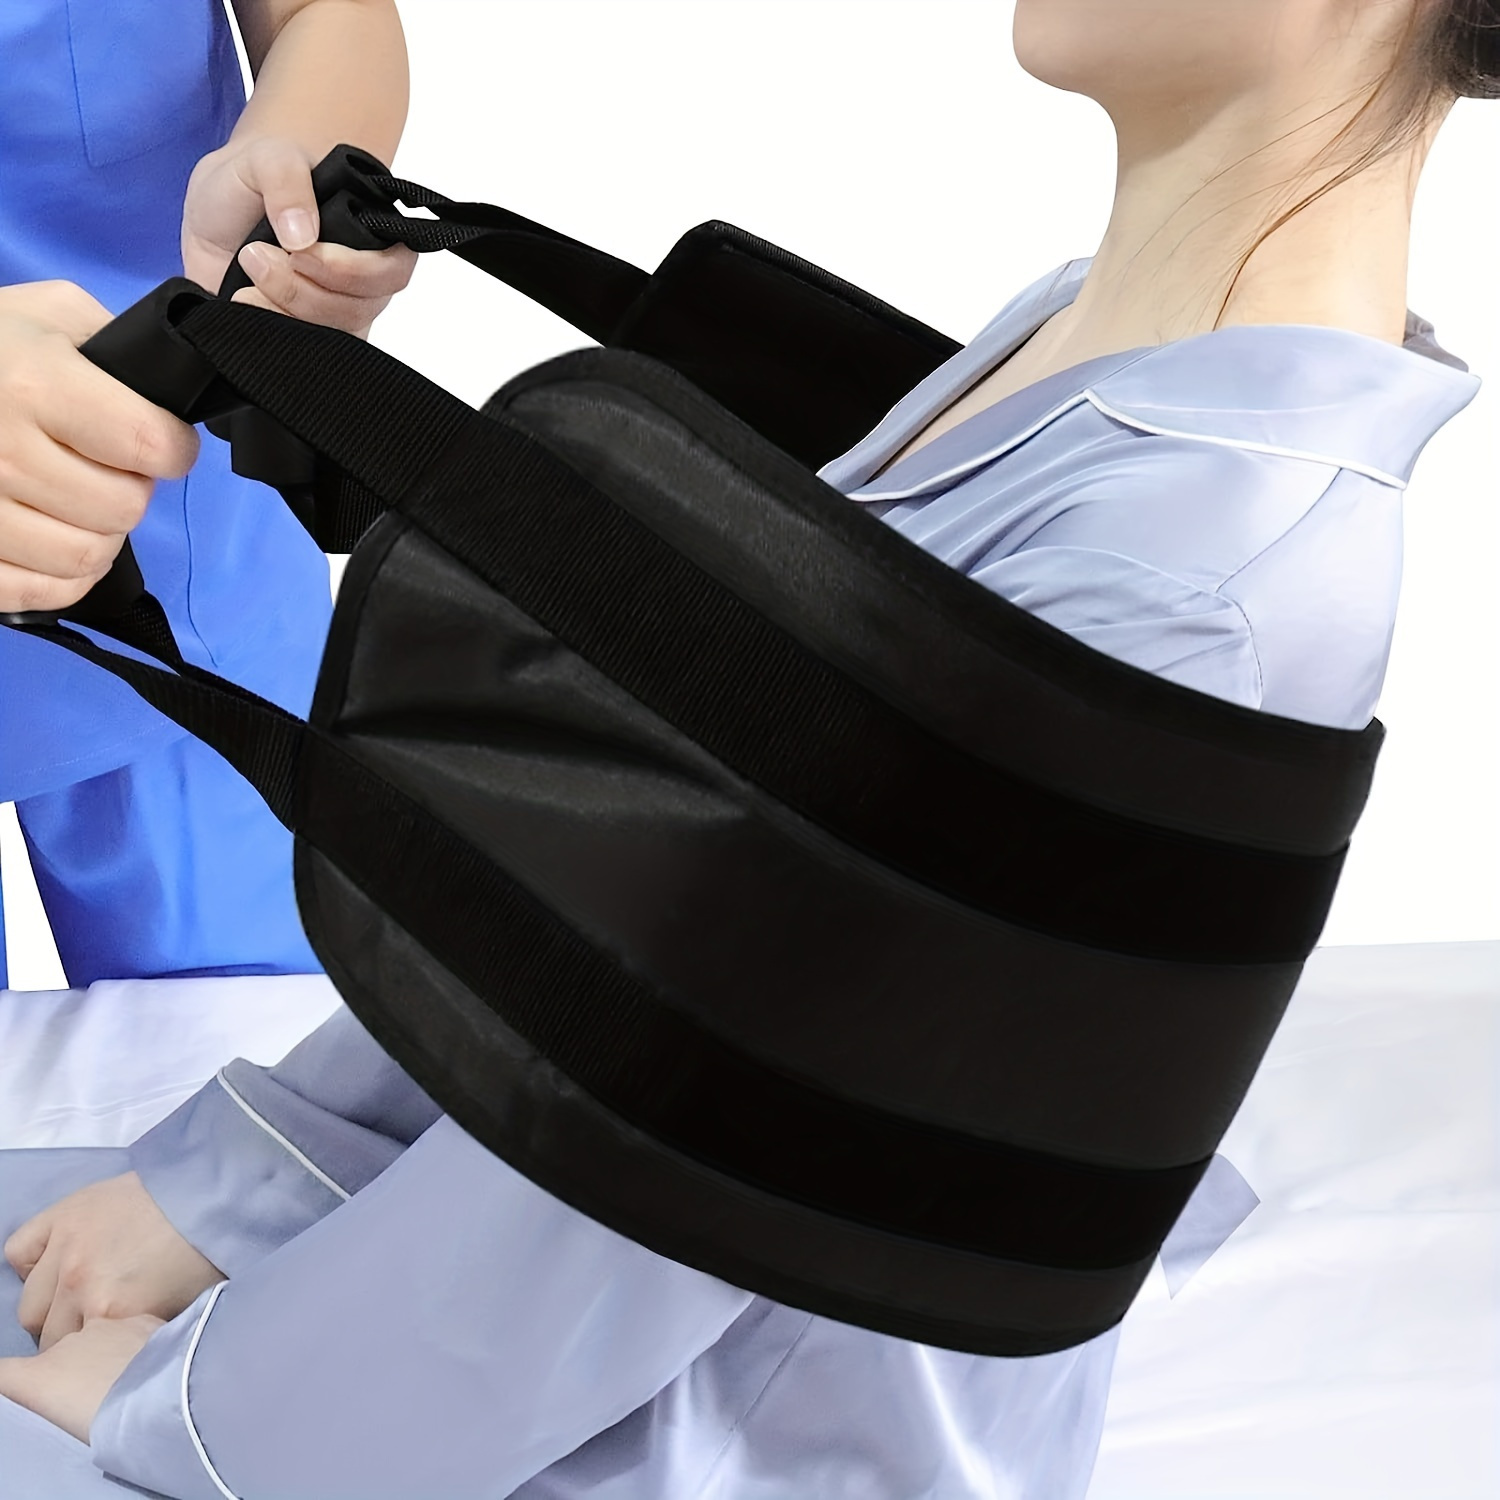 

1pc Patient Padded Bed Transfer Nursing Sling, Safety Lift Aid Equipment For Elderly, Patient Care Transfer Nursing Sling Handle Back Lifting Activity Strap